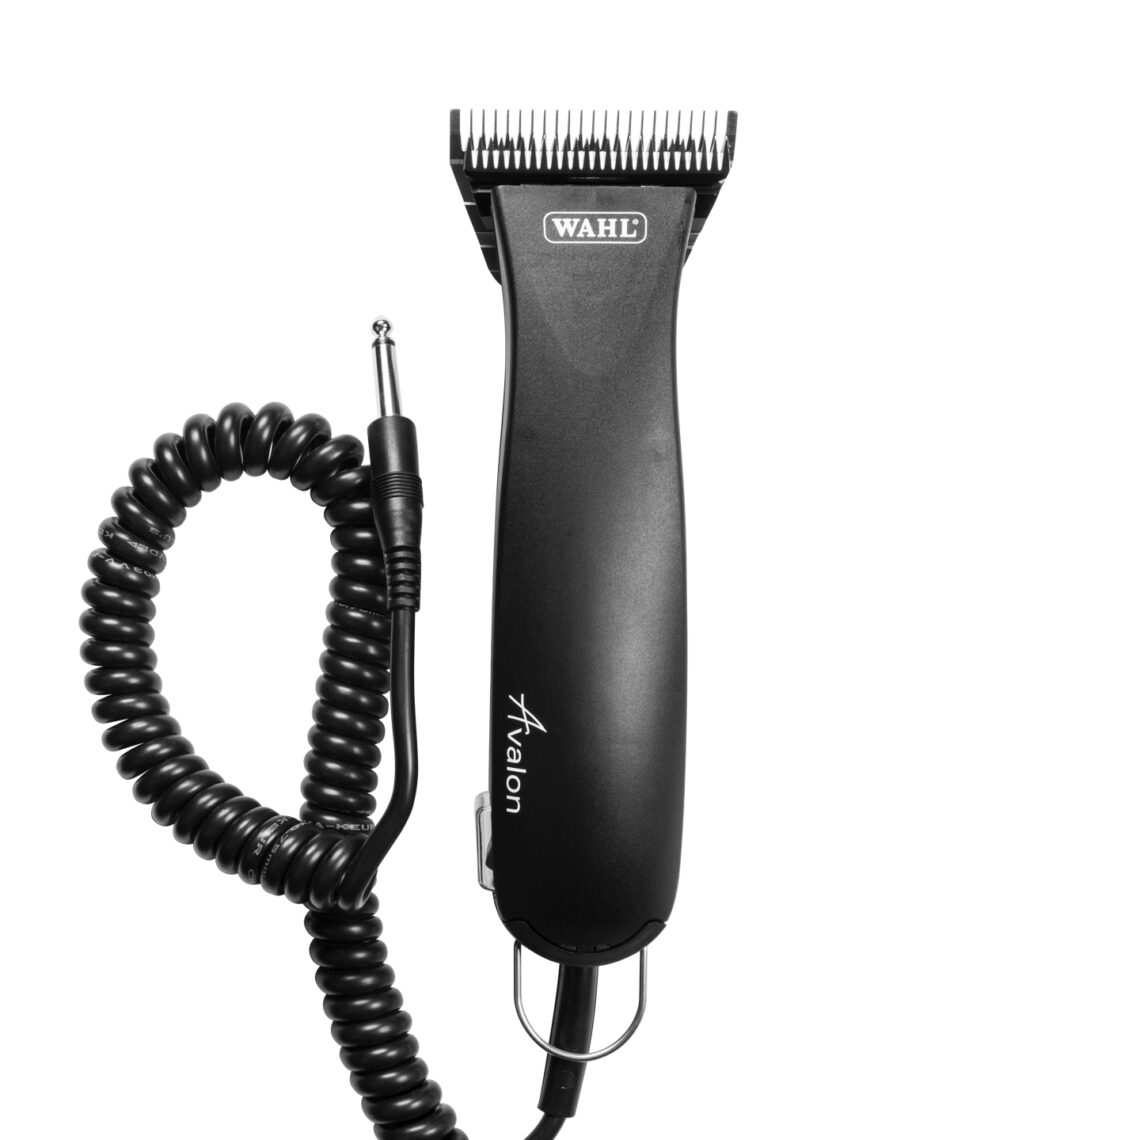 wahl avalon clippers